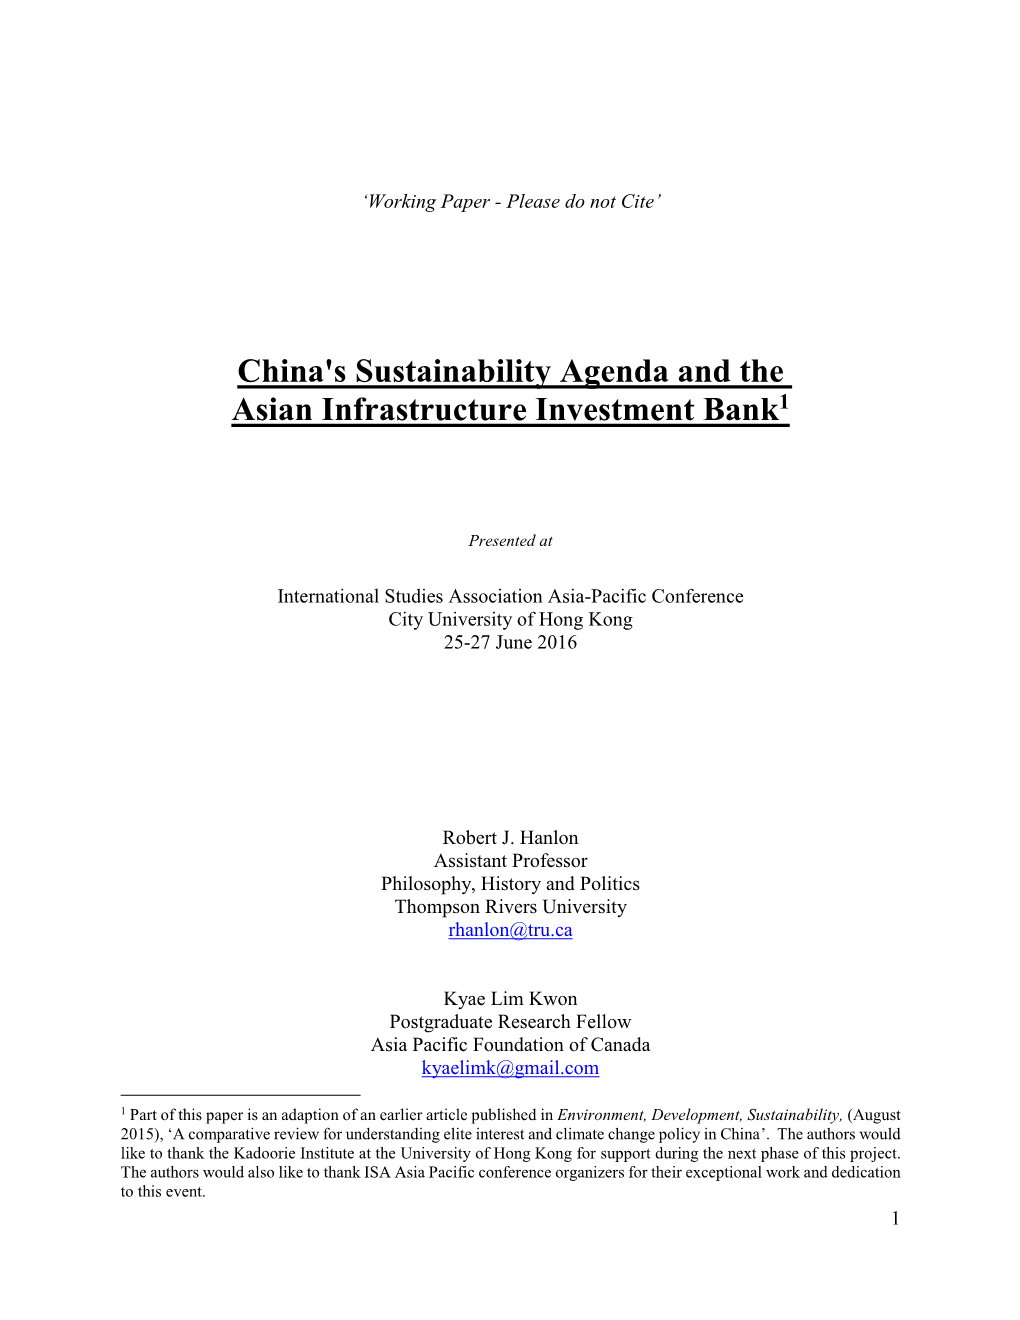 China's Sustainability Agenda and the Asian Infrastructure Investment Bank1